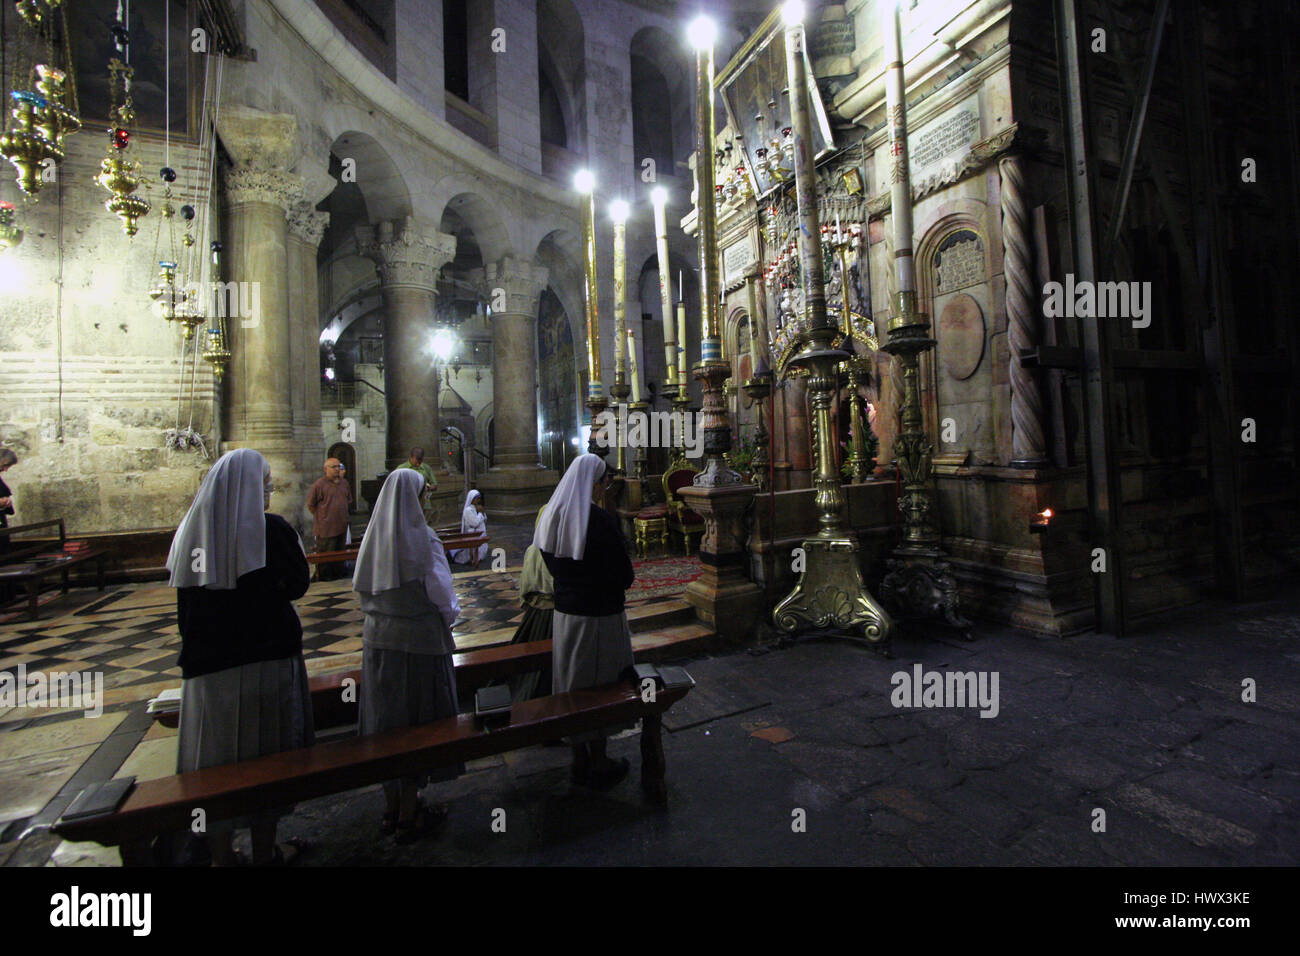 Early in the morning before the arrival of pilgrims from around the world, nuns praying in the Church of the Holy Sepulchre, Jerusalem Stock Photo